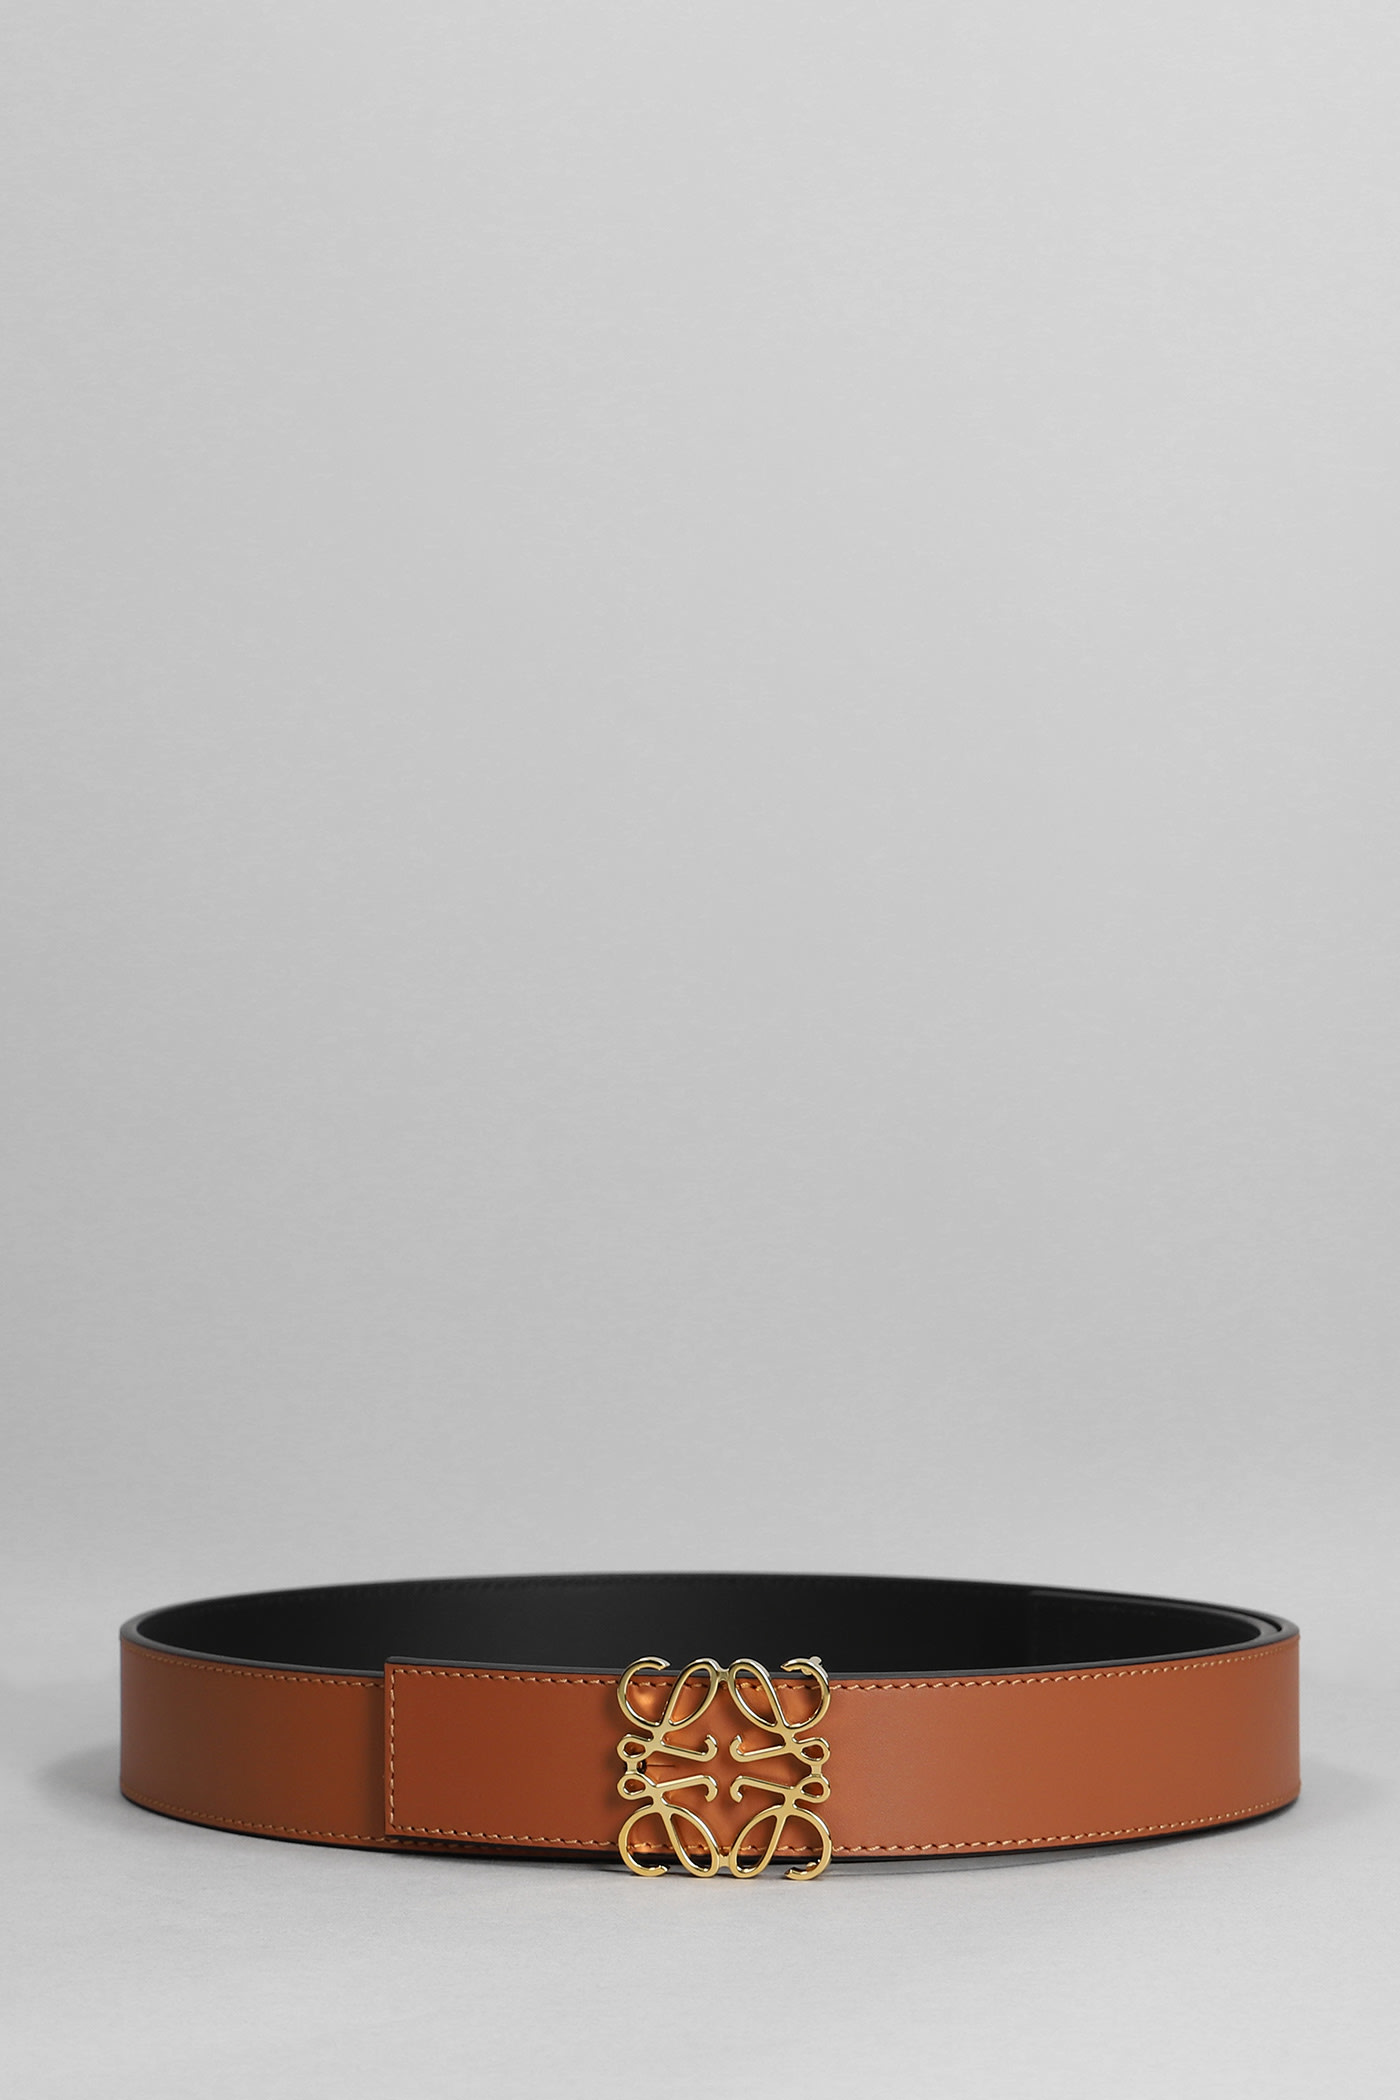 Loewe Belts In Leather Color Leather